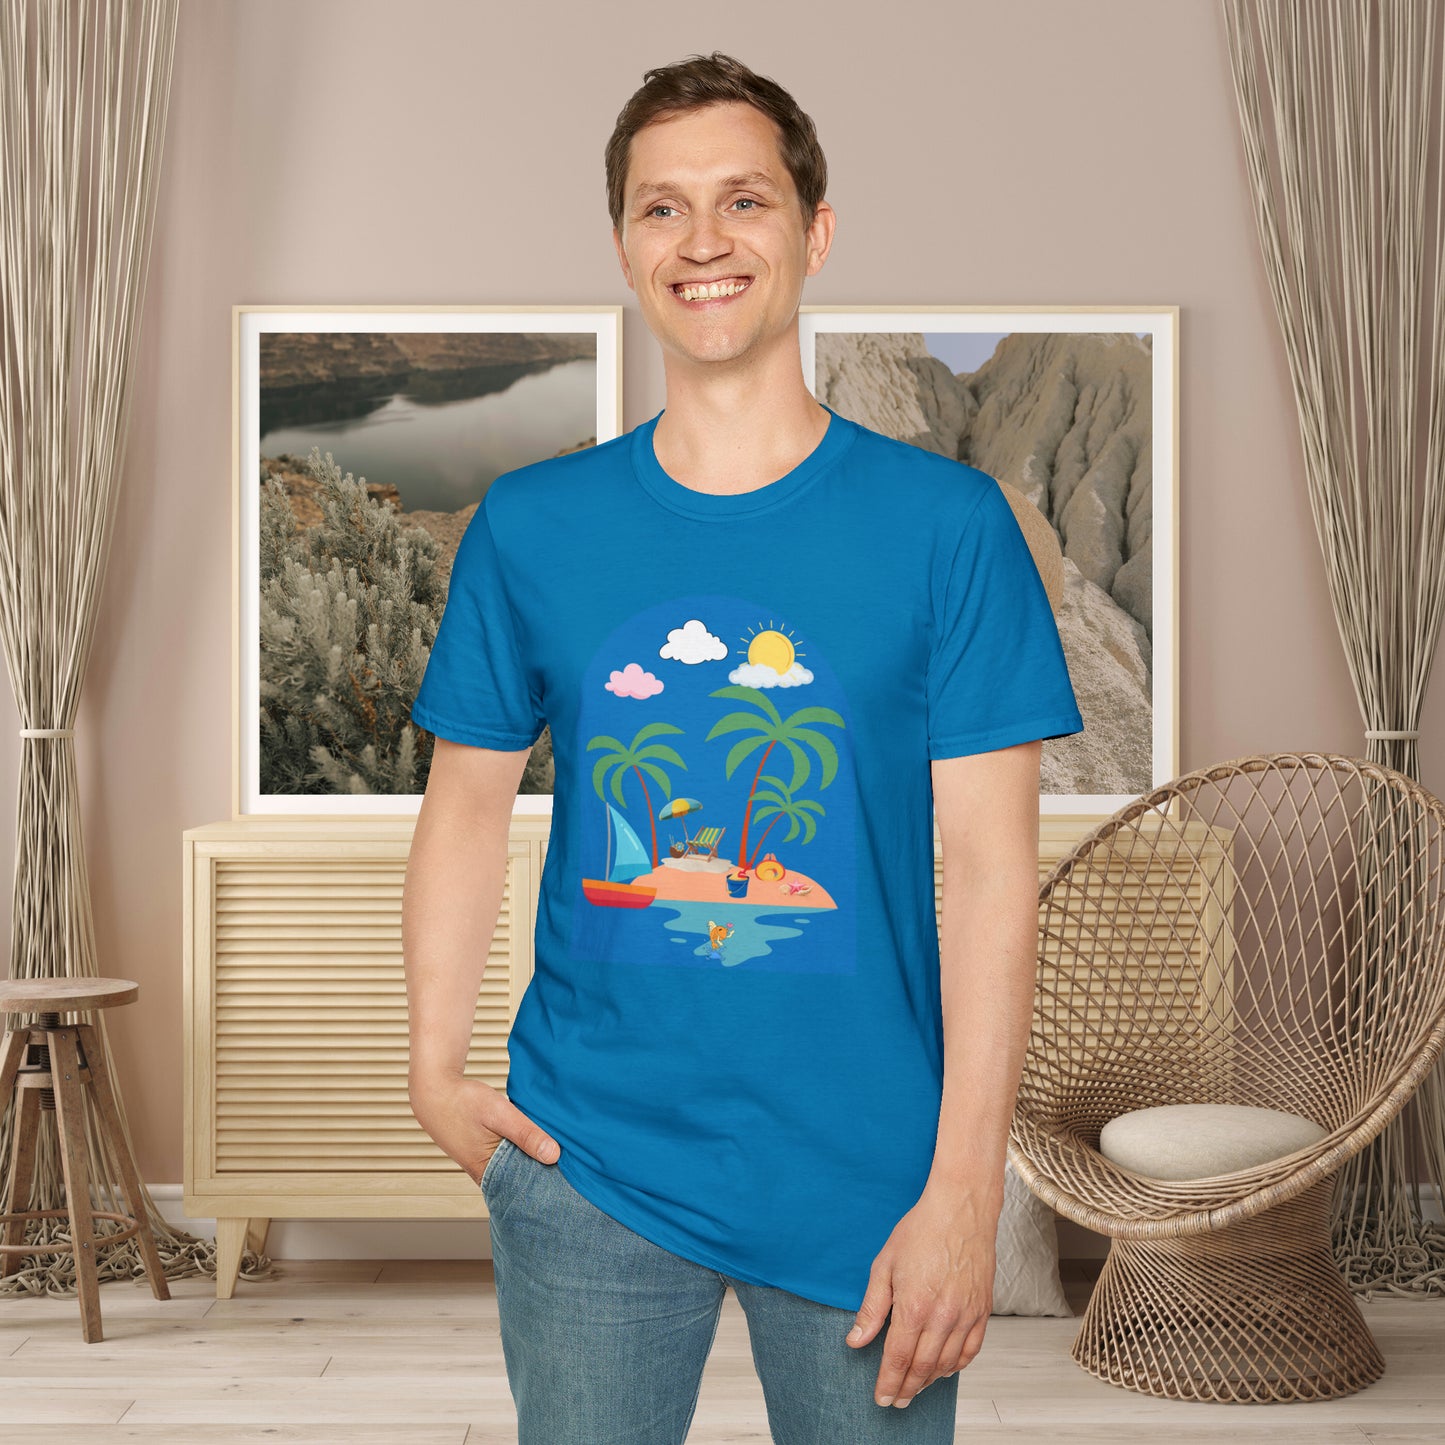 Do you smile when you think of being on an island with the sun, sand and breeze embracing you? This Unisex Softstyle T-Shirt is made for that beach loving person.